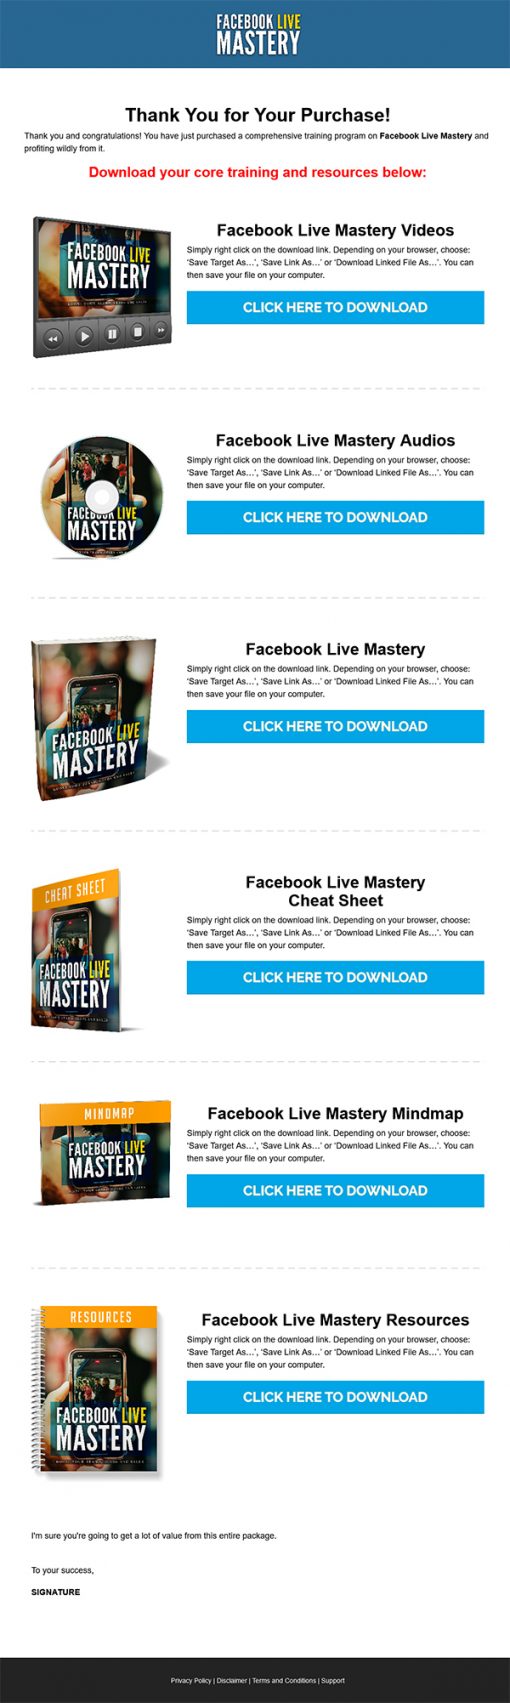 Facebook Live Mastery Ebook and Videos MRR